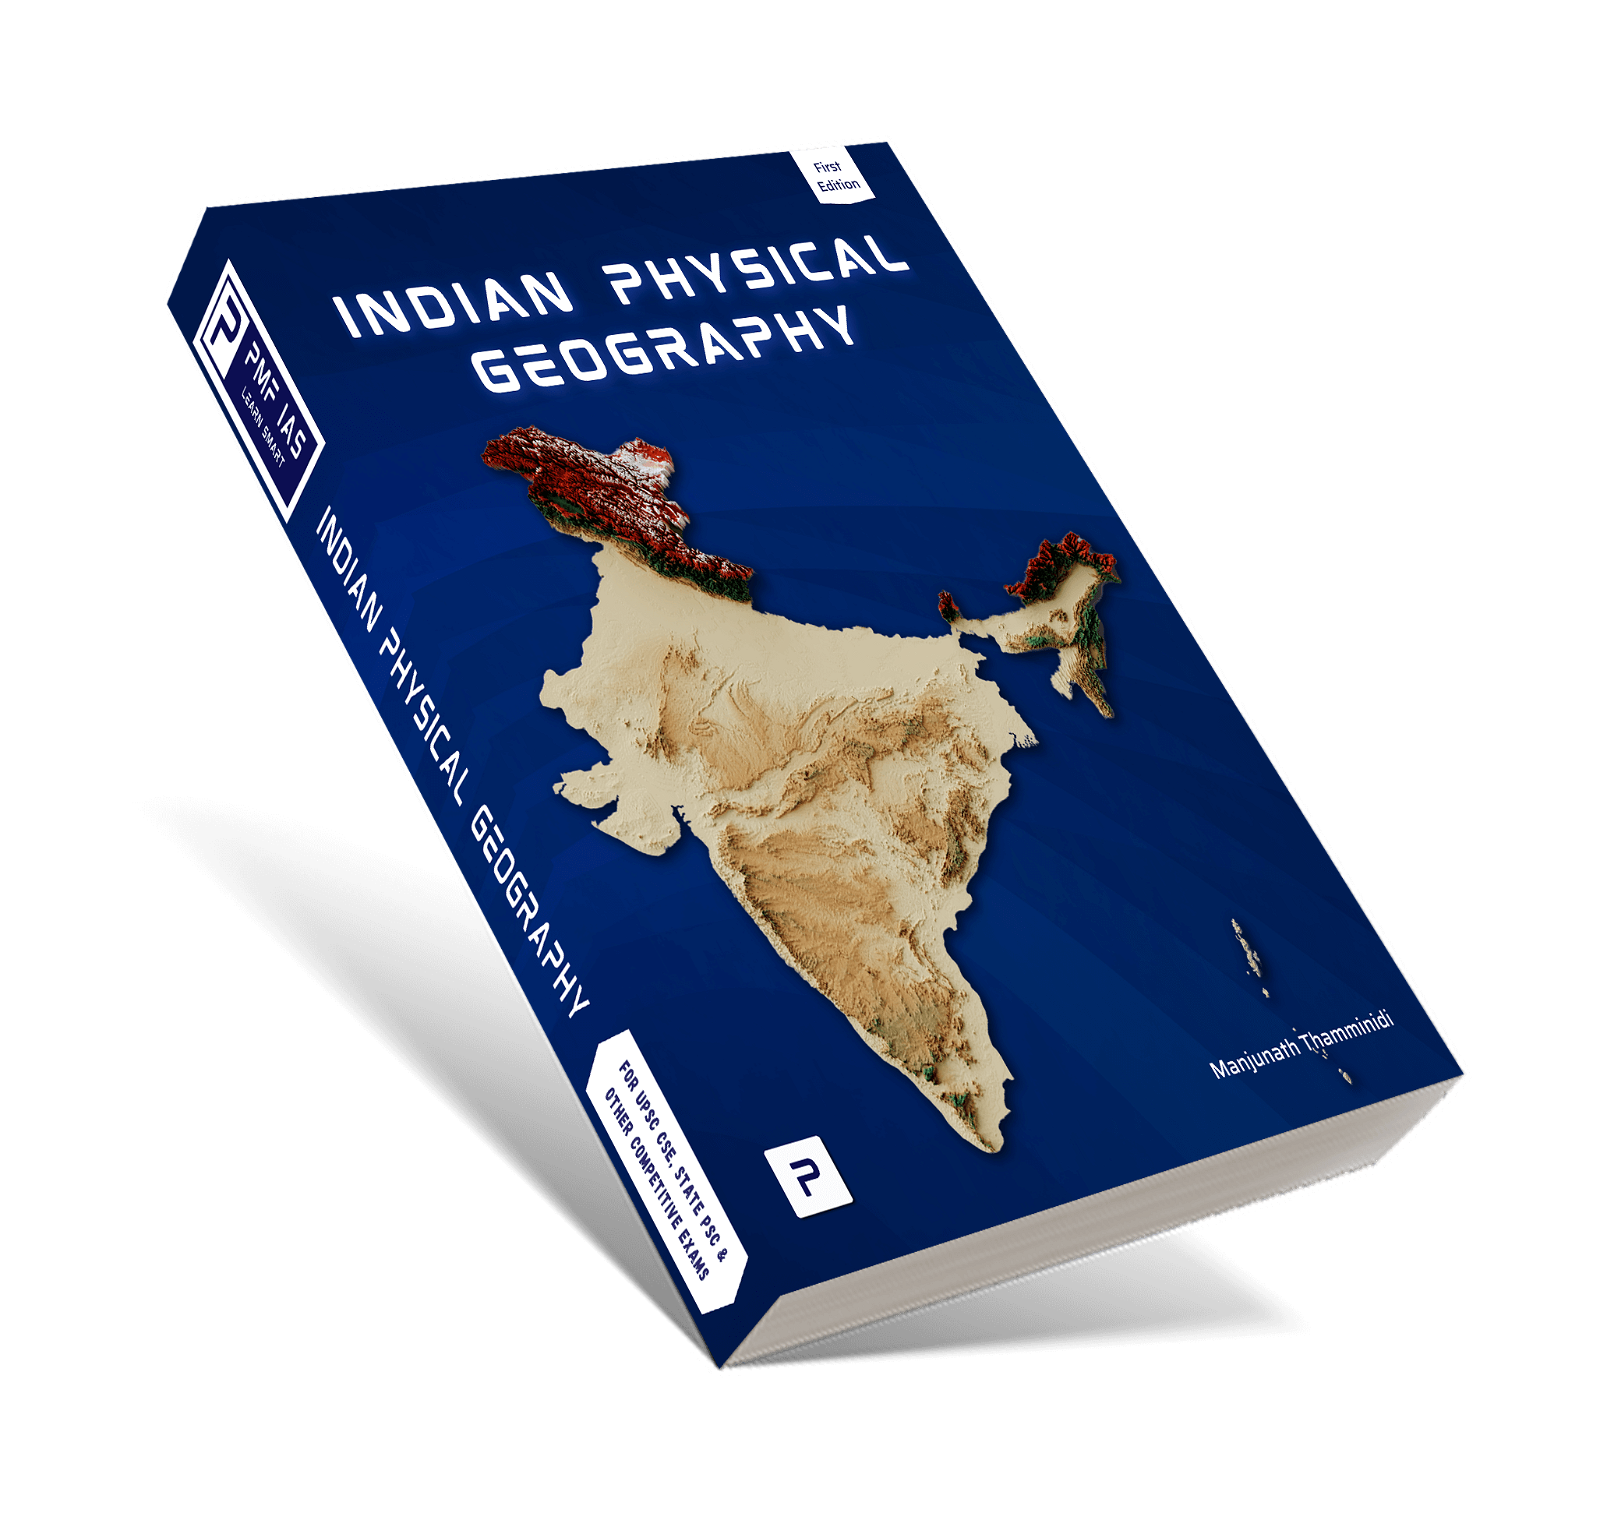 Indian Physical Geography Hardcopy Book